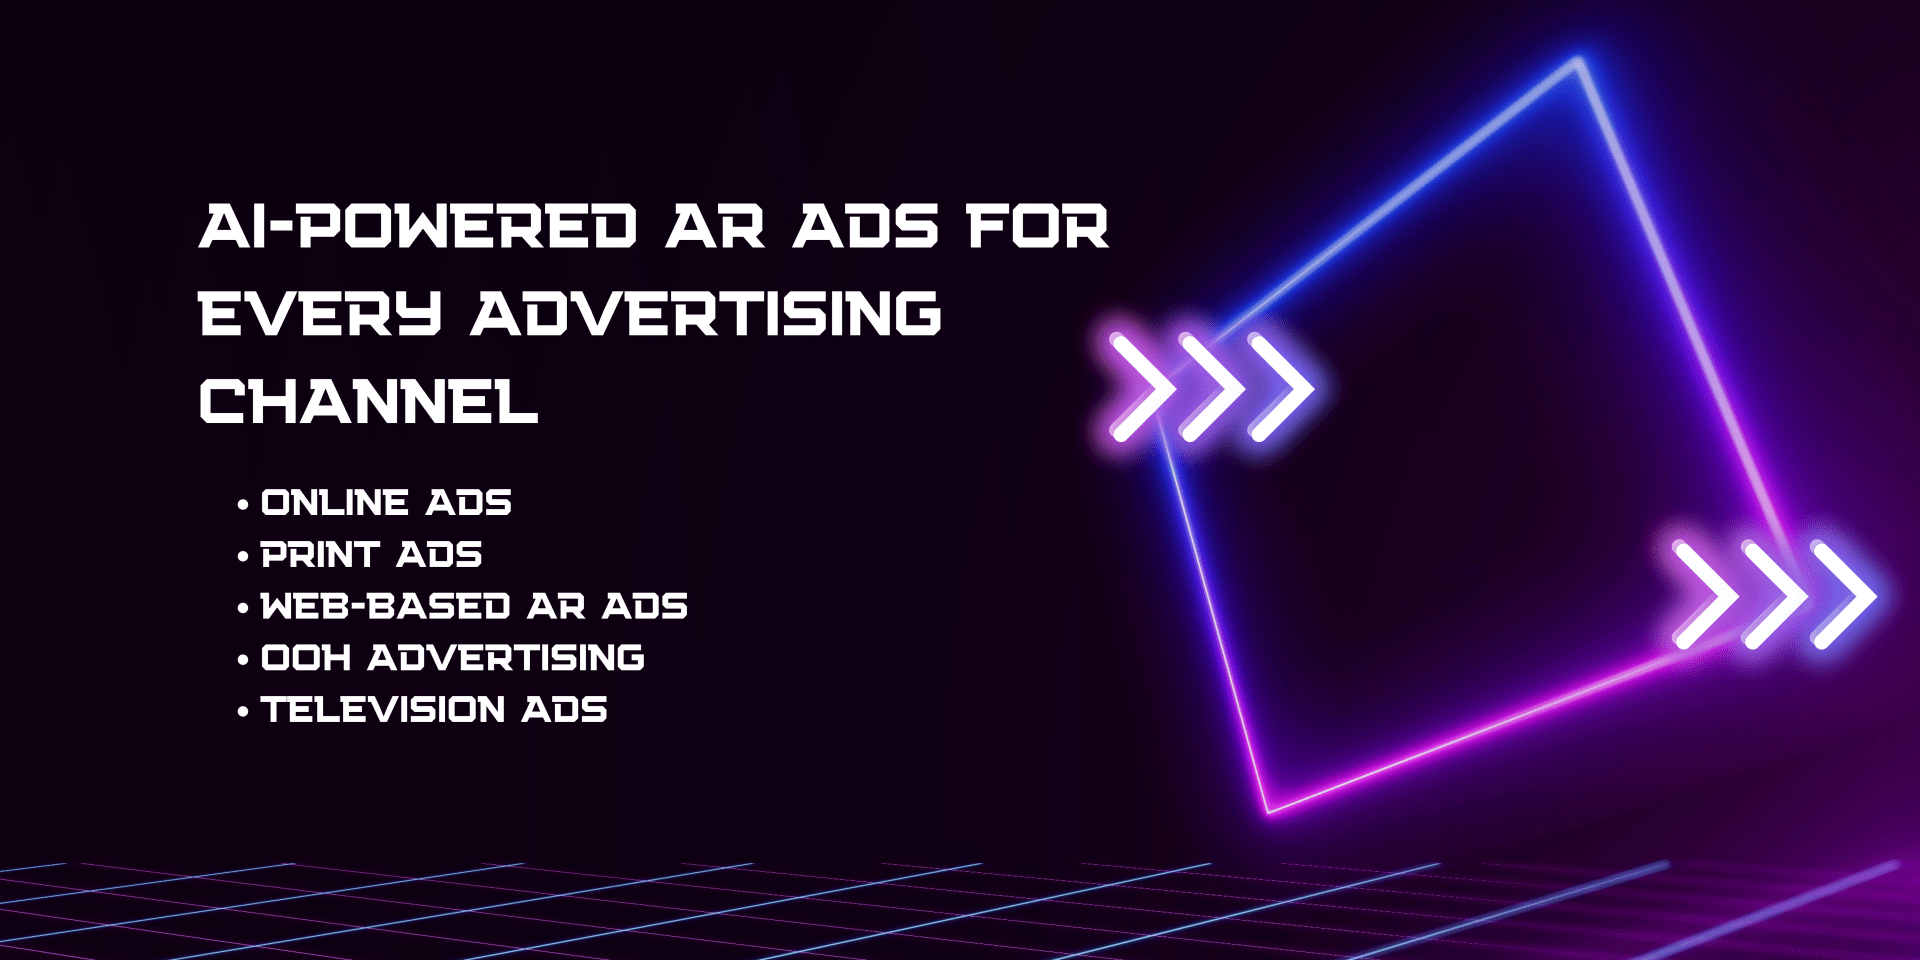 AR ads for all advertising channels - OOH, Television, Digitial Ads, 